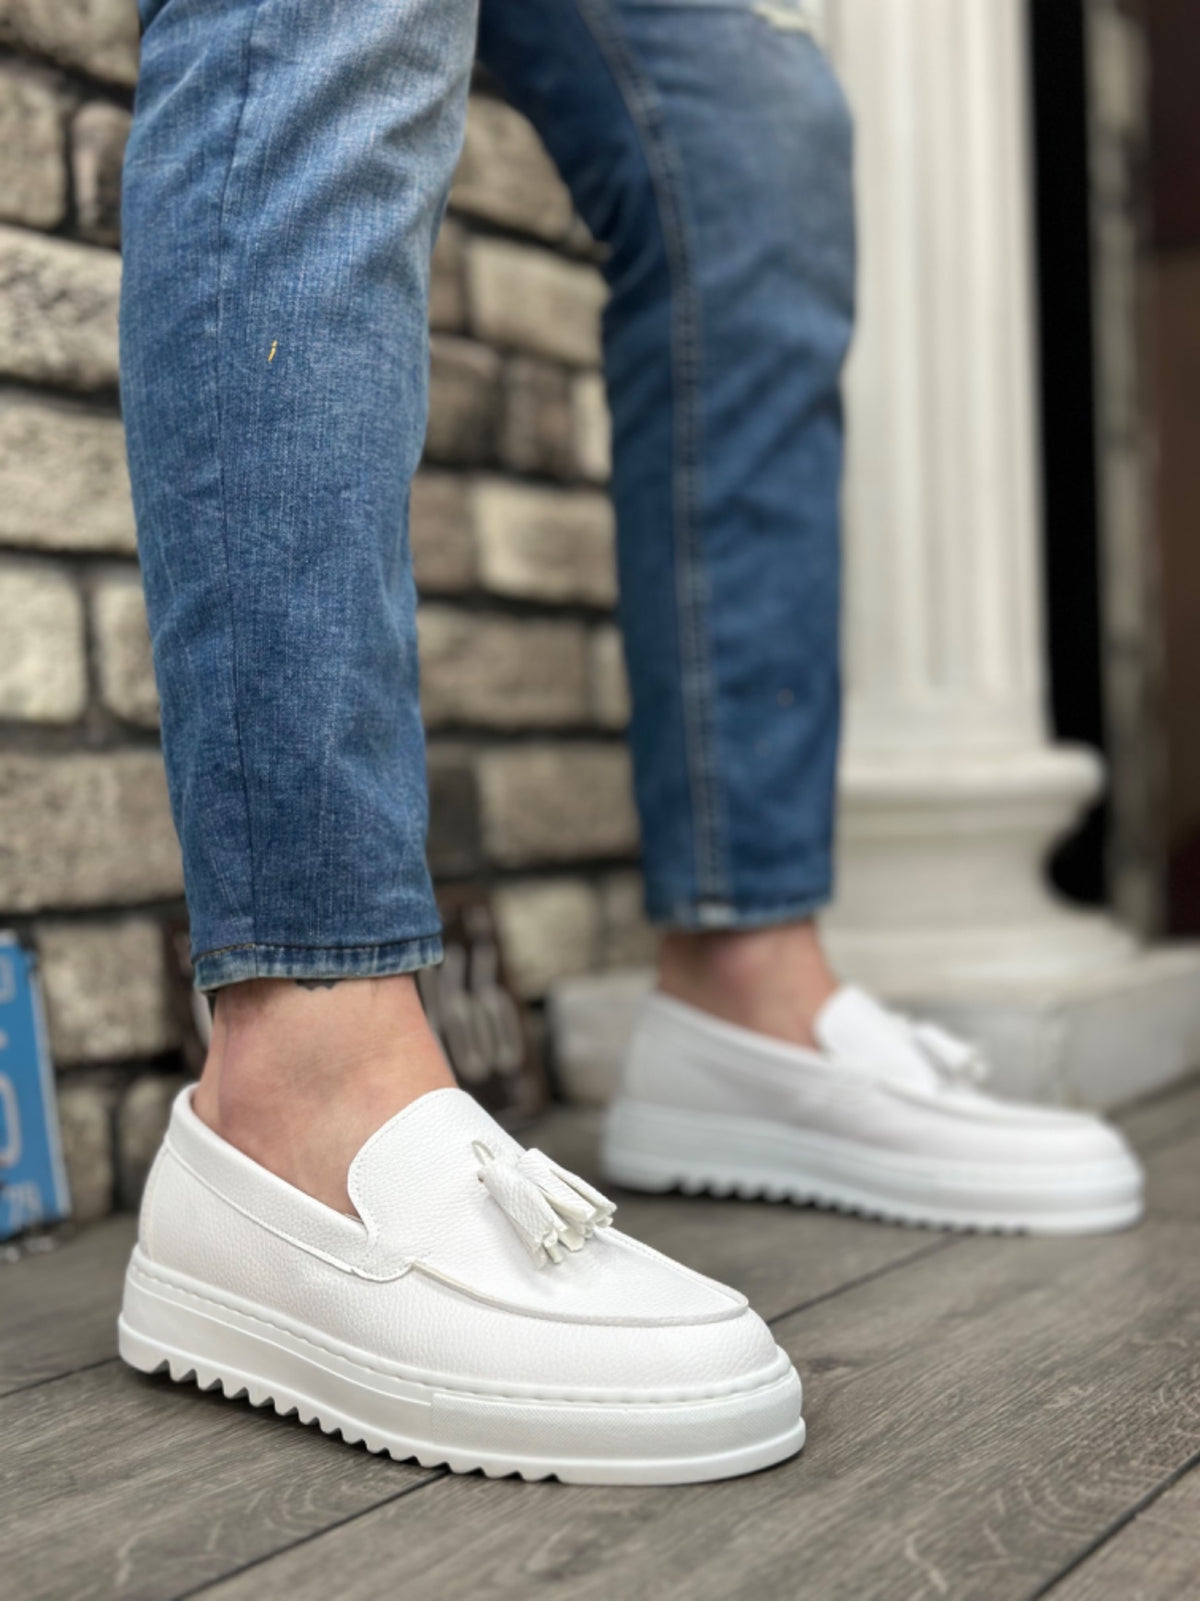 BA0154 Laceless High Sole Skin White Color Tassel Men's Shoes - STREETMODE™